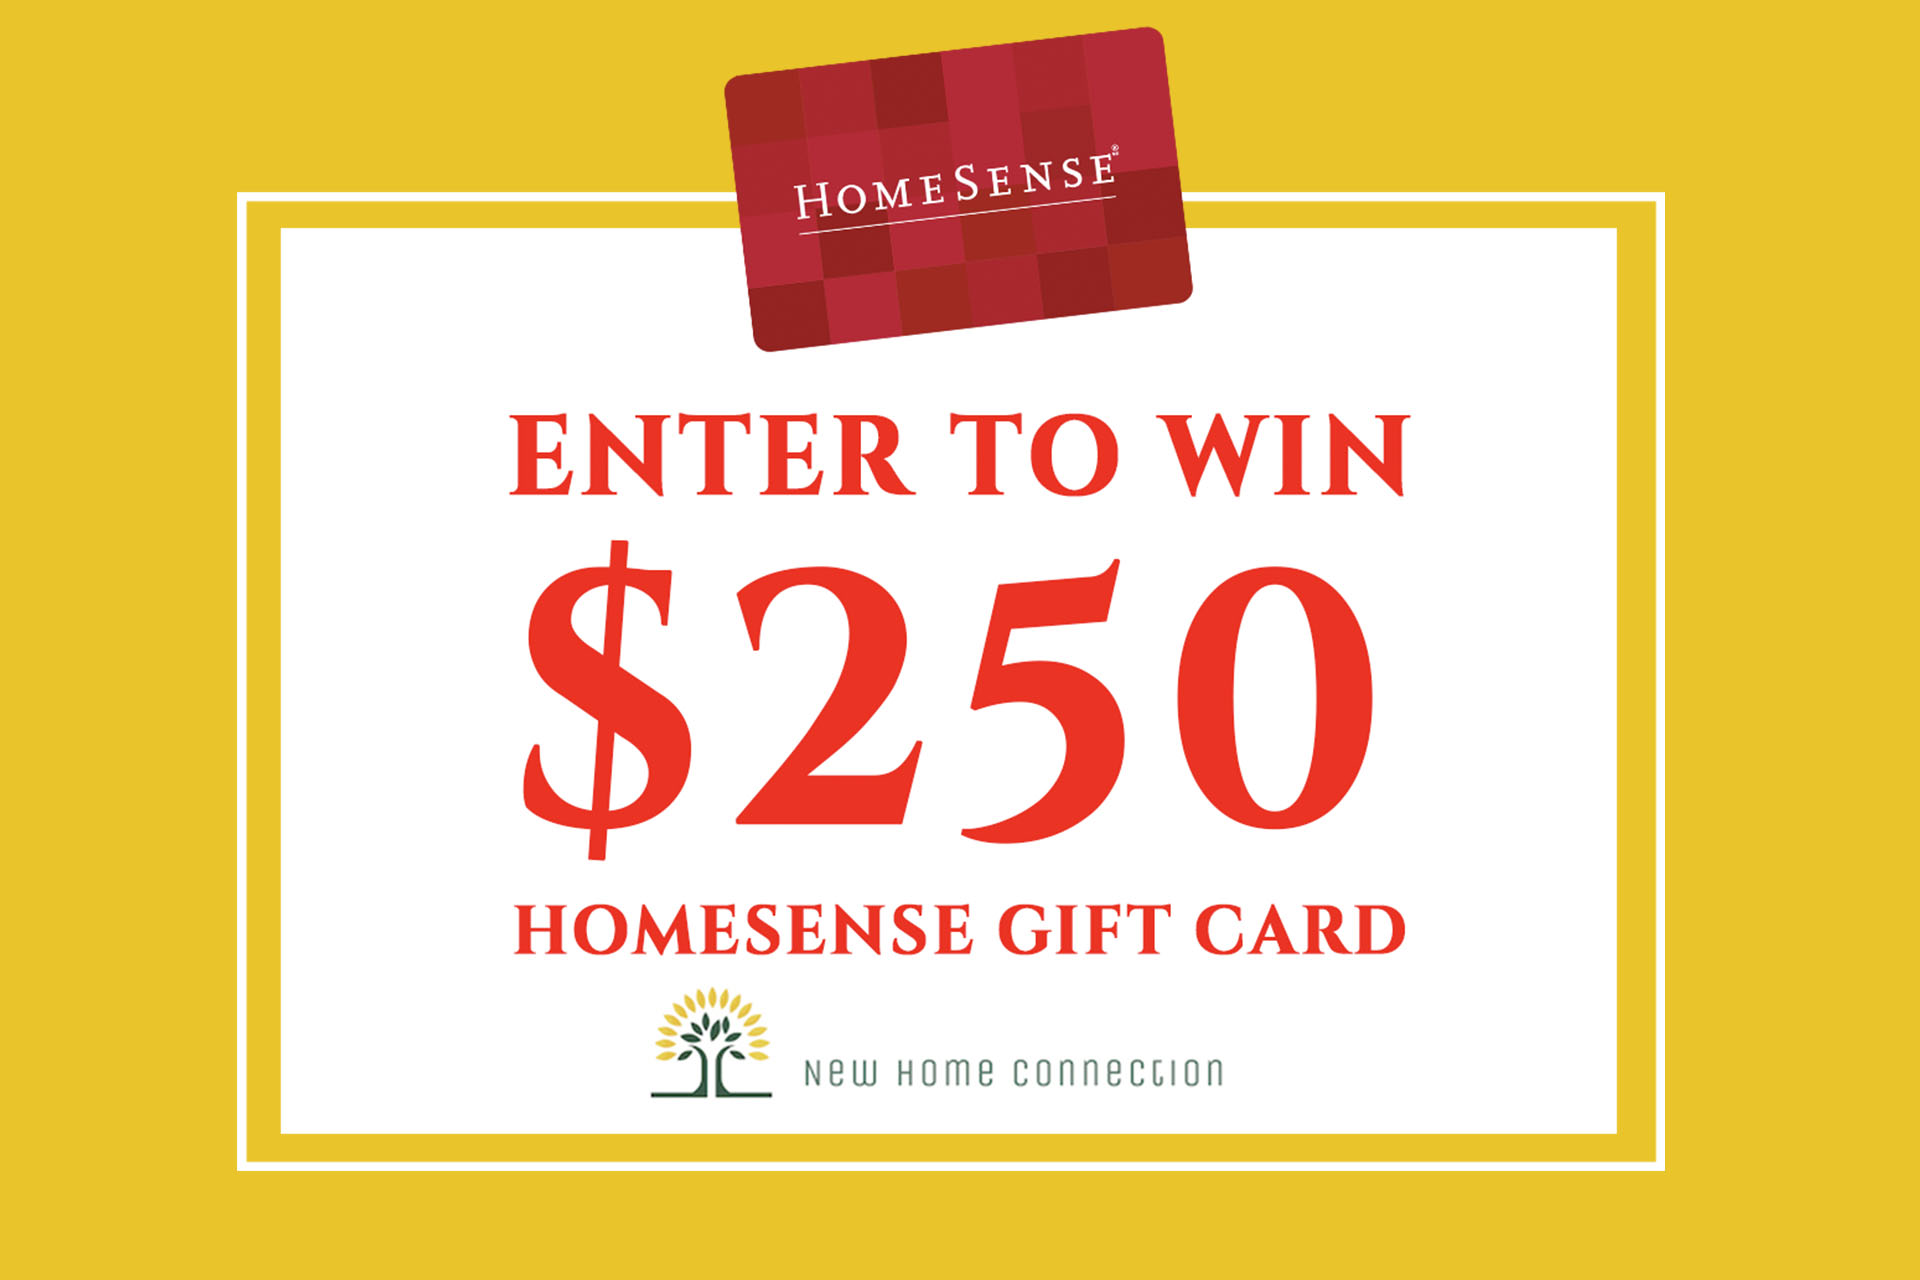 HomeSense Gift Card Sweepstakes - New Home Connection - Contest Canada